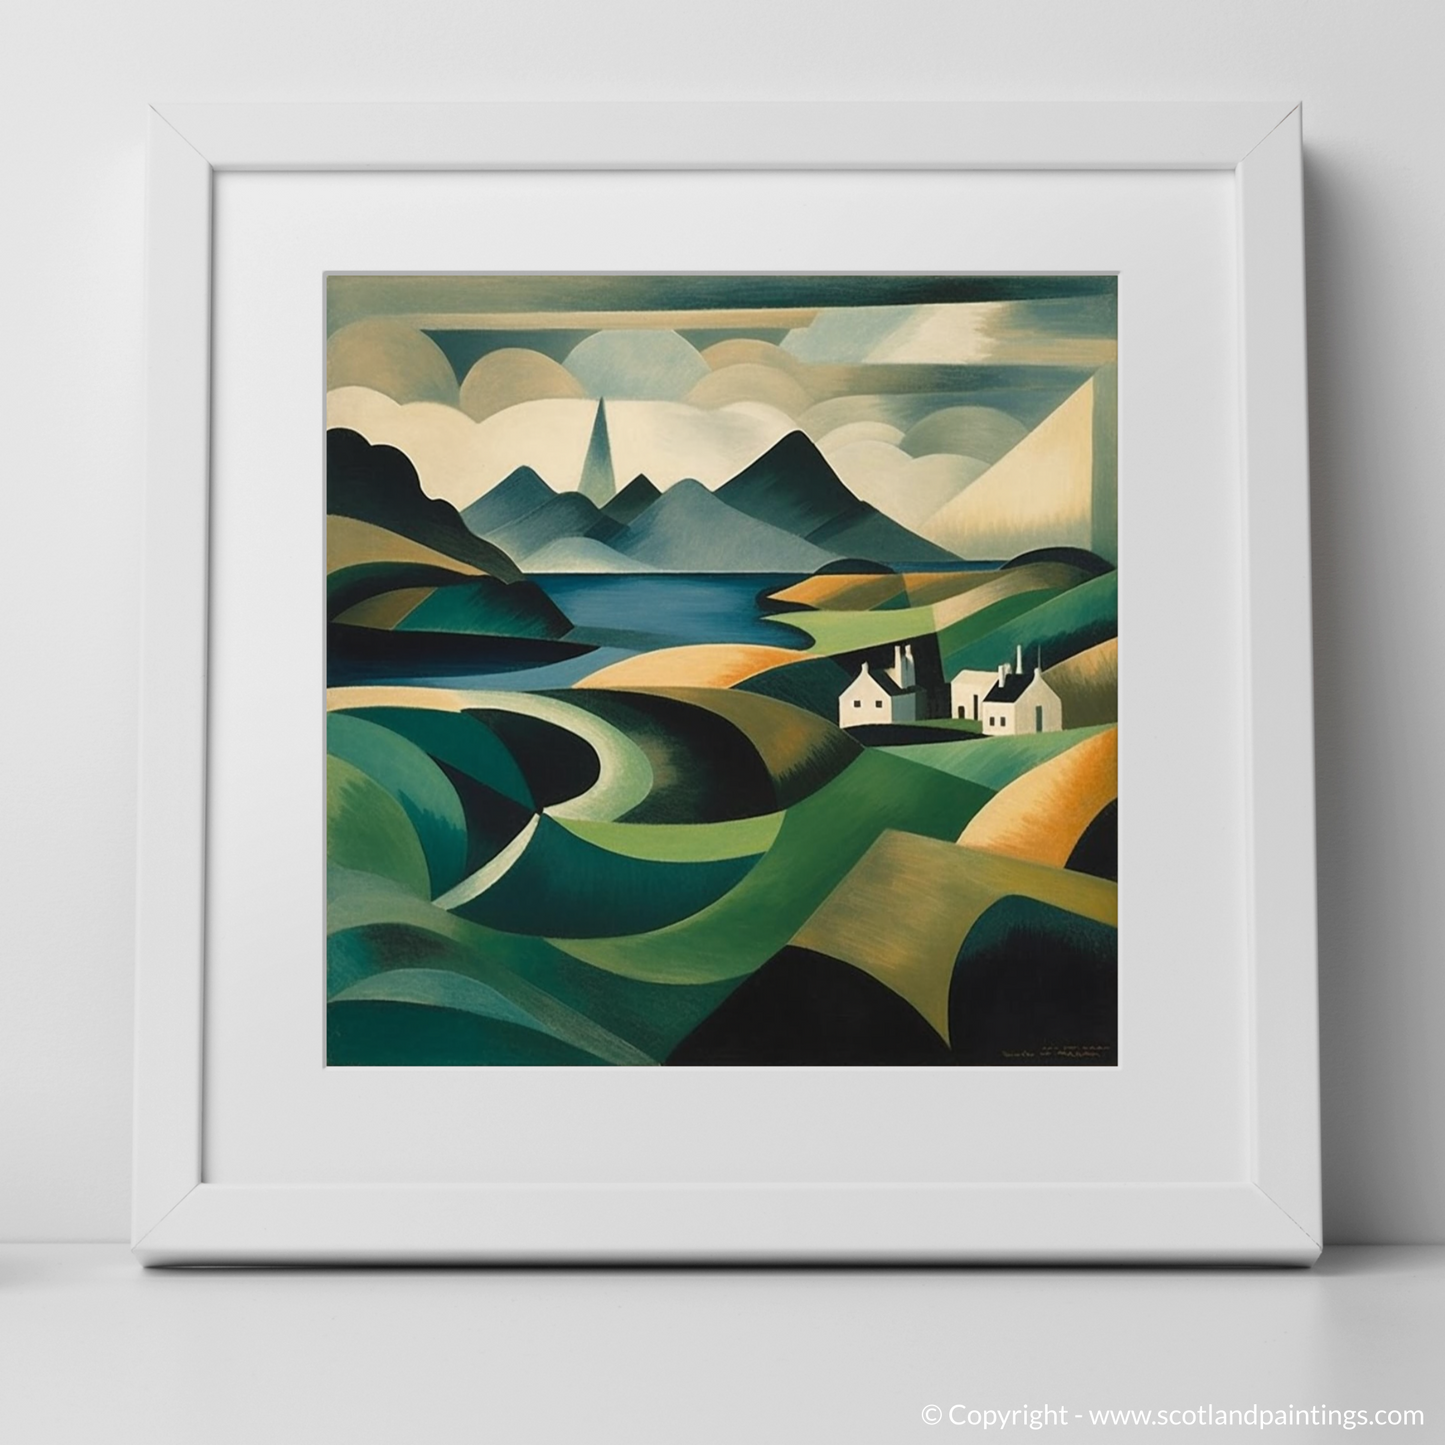 Isle of Islay Enigma: An Abstract Scottish Landscape